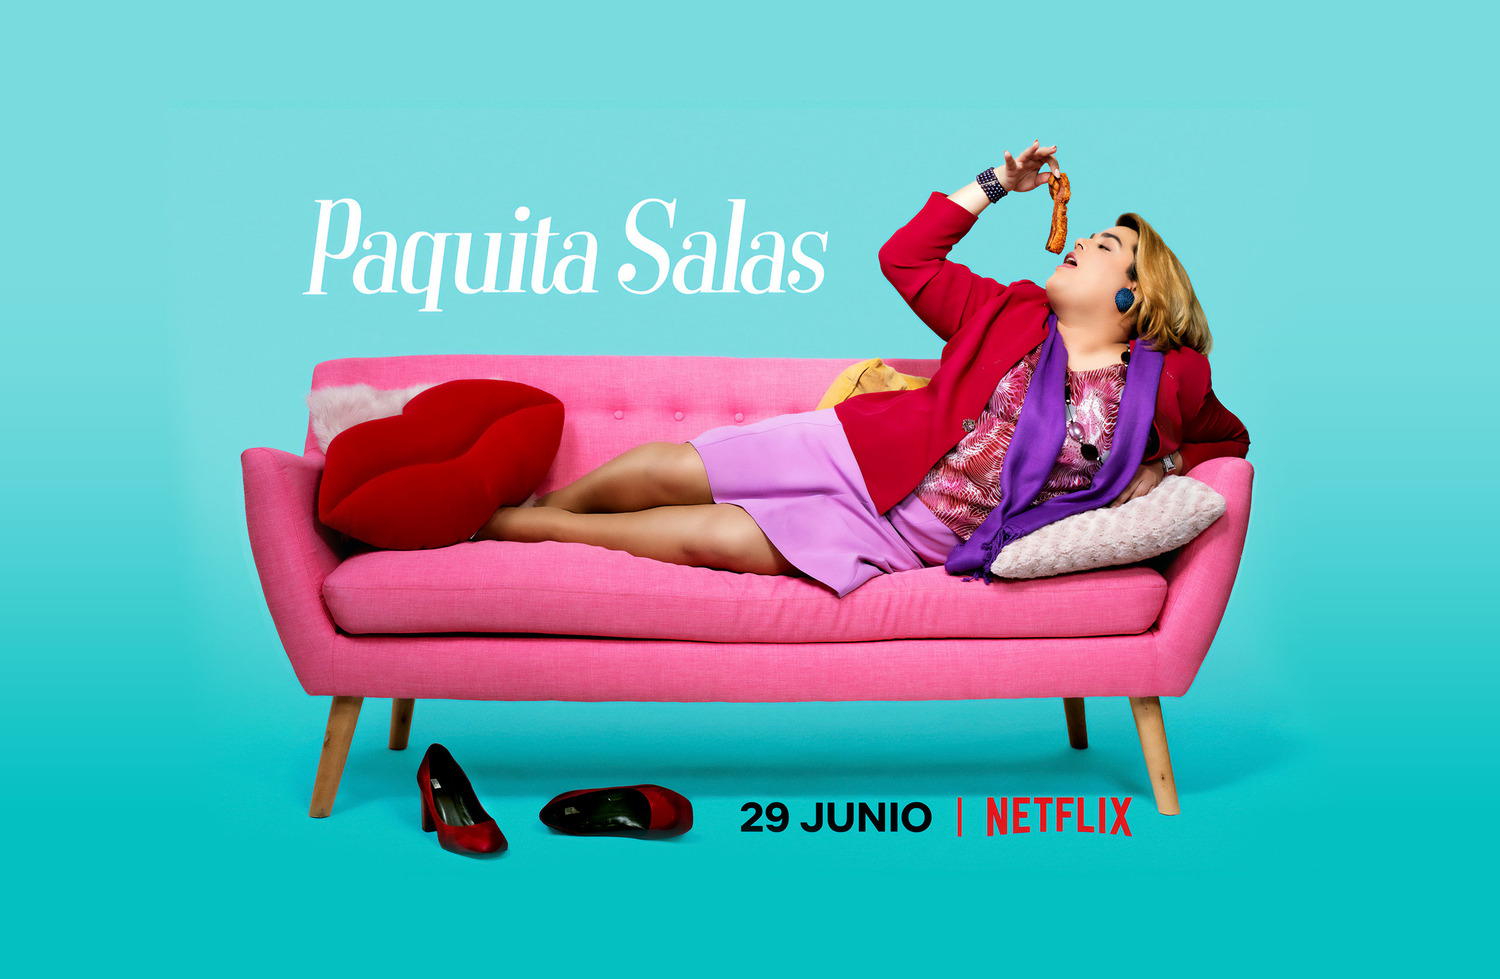 Extra Large TV Poster Image for Paquita Salas (#5 of 7)